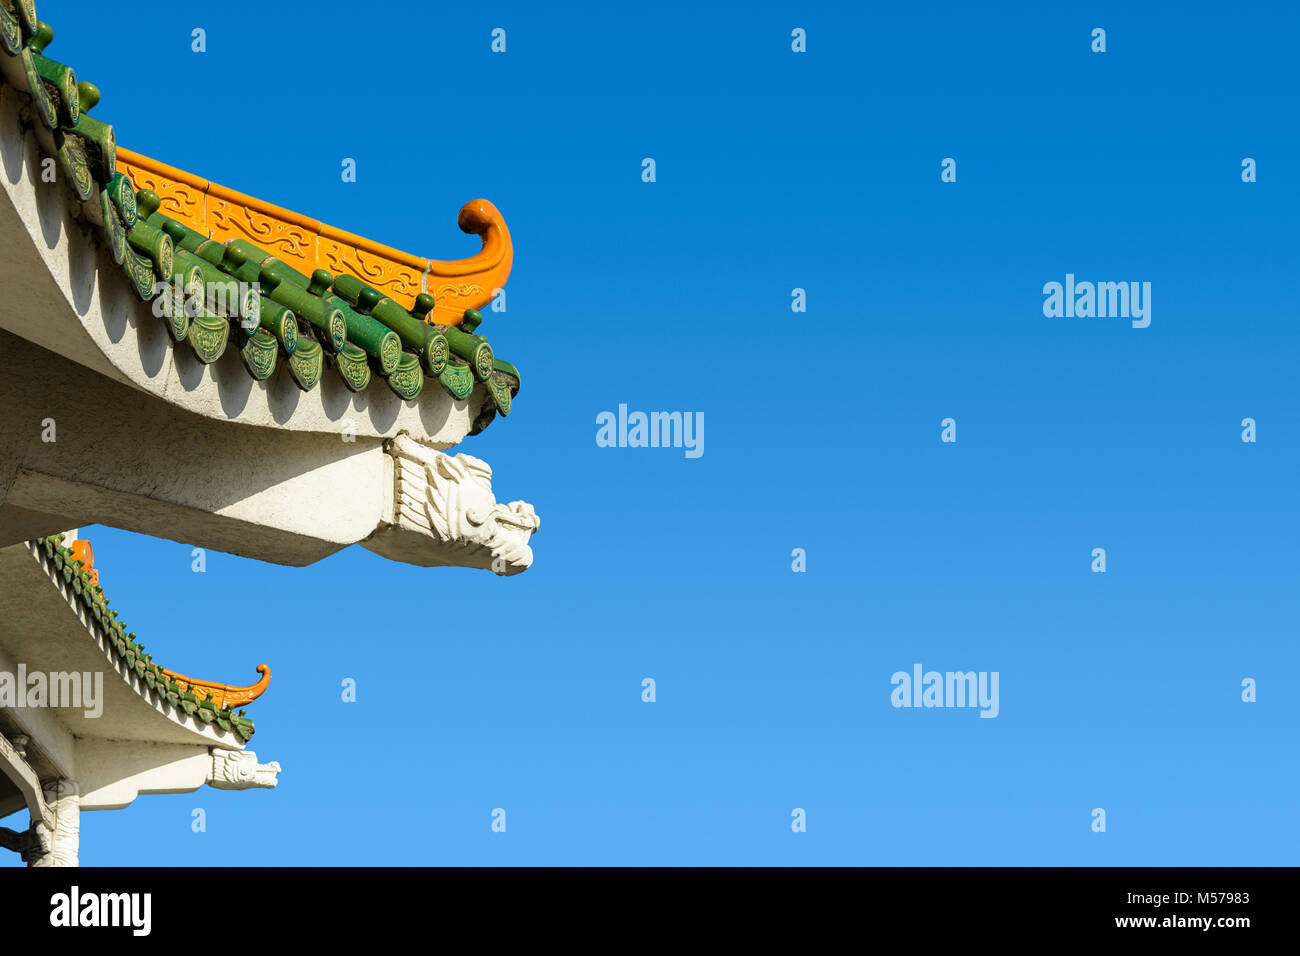 Chinese-inspired curved roof on a contemporary building with decorative glazed roof tiles and dragon shaped concrete beam against a deep blue sky. Stock Photo